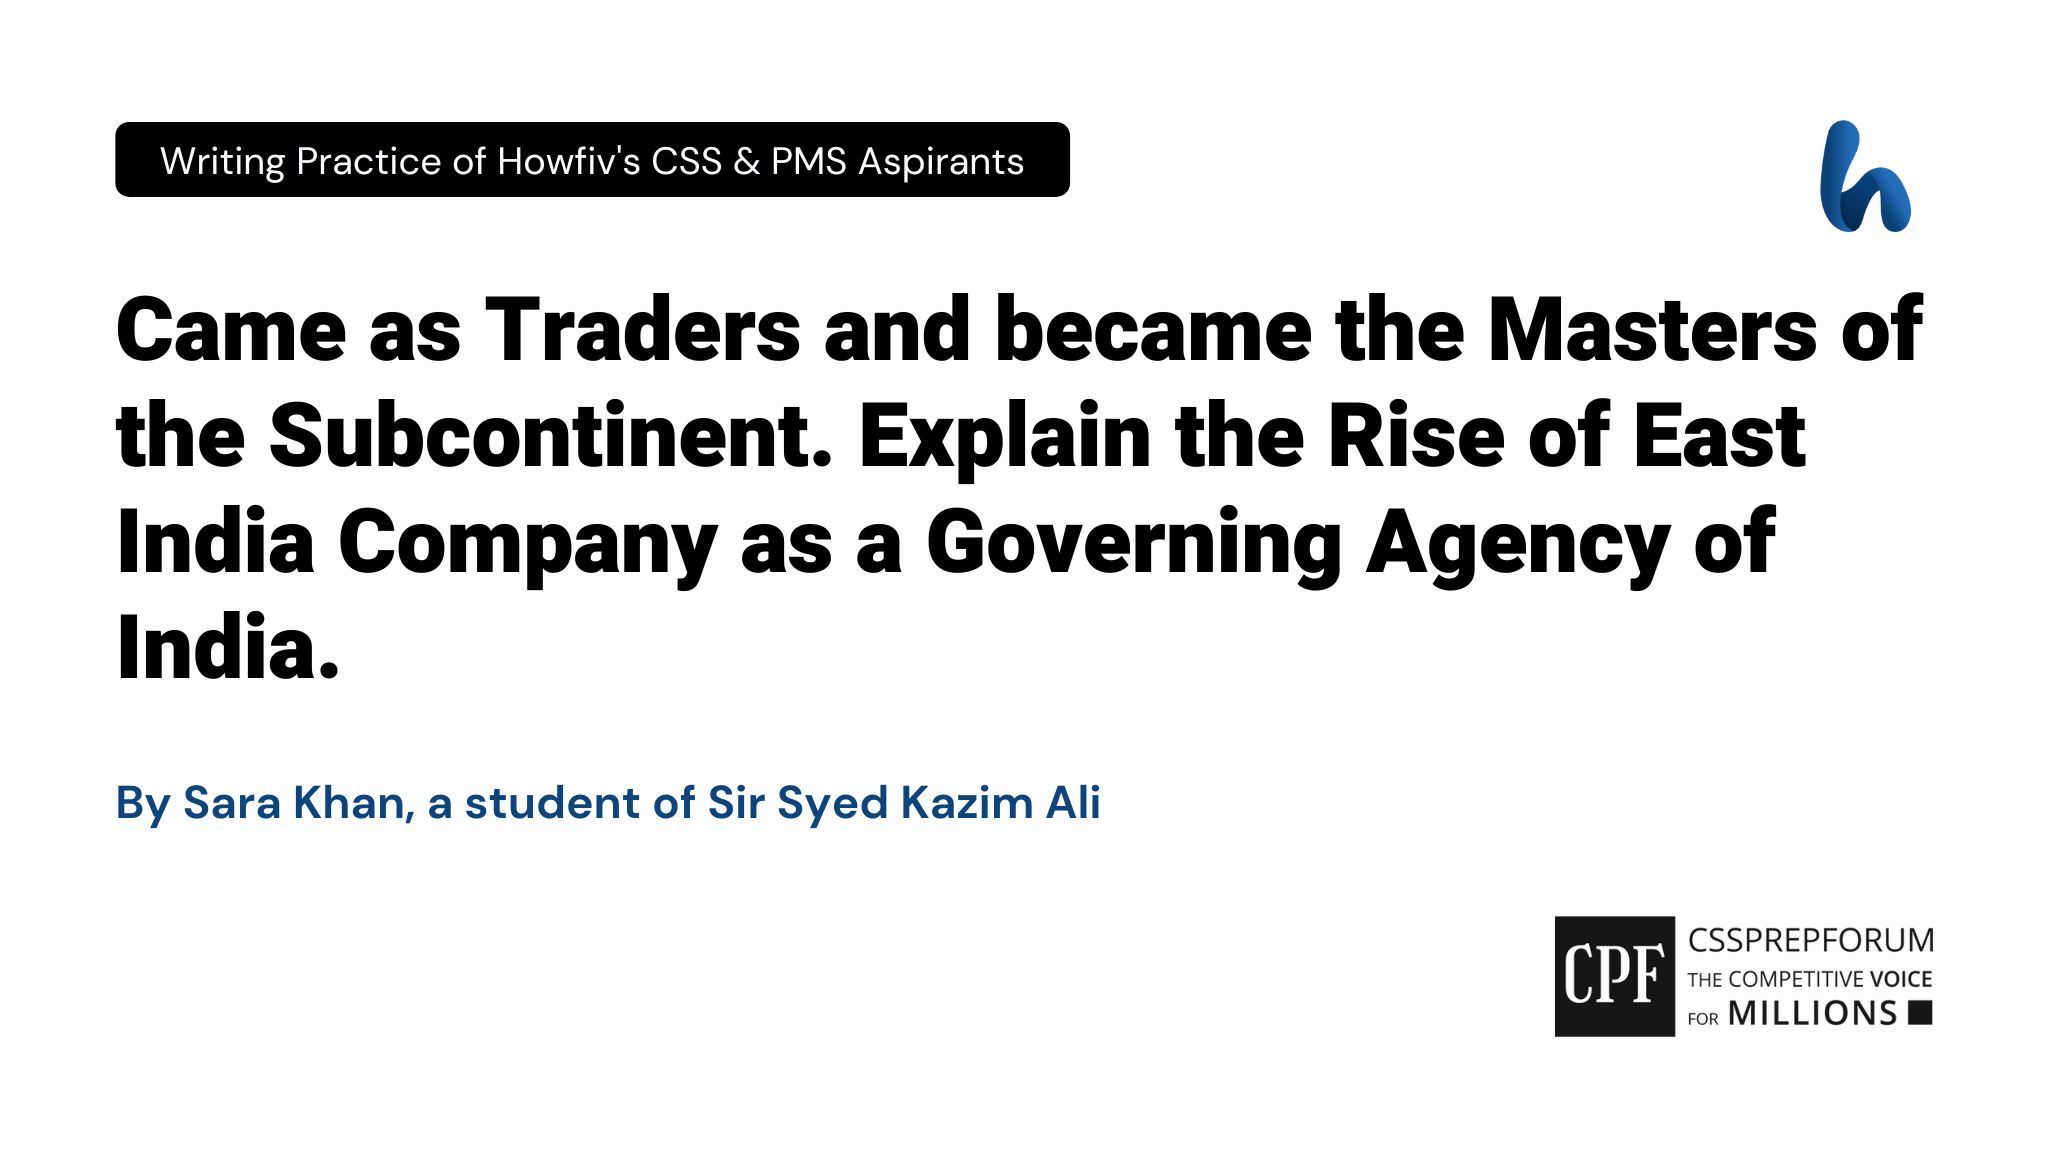 Came as Traders, became Masters of the Subcontinent. Explain the Rise of the East India Company as a Governing Agency of India.